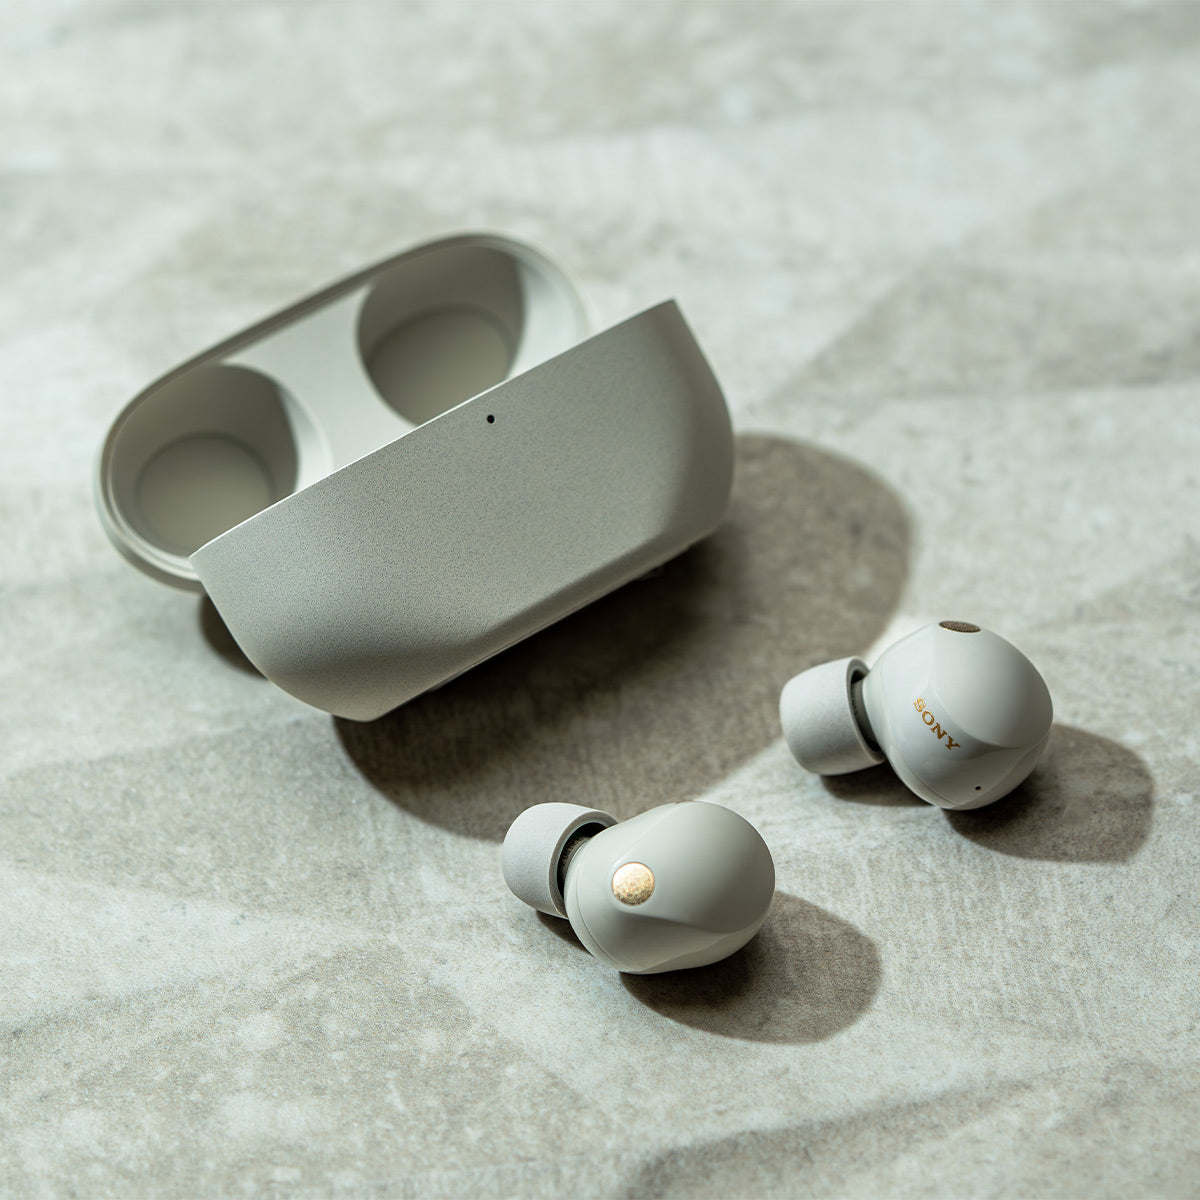 Sony WF-1000XM5 noise-canceling earbuds review: better in every